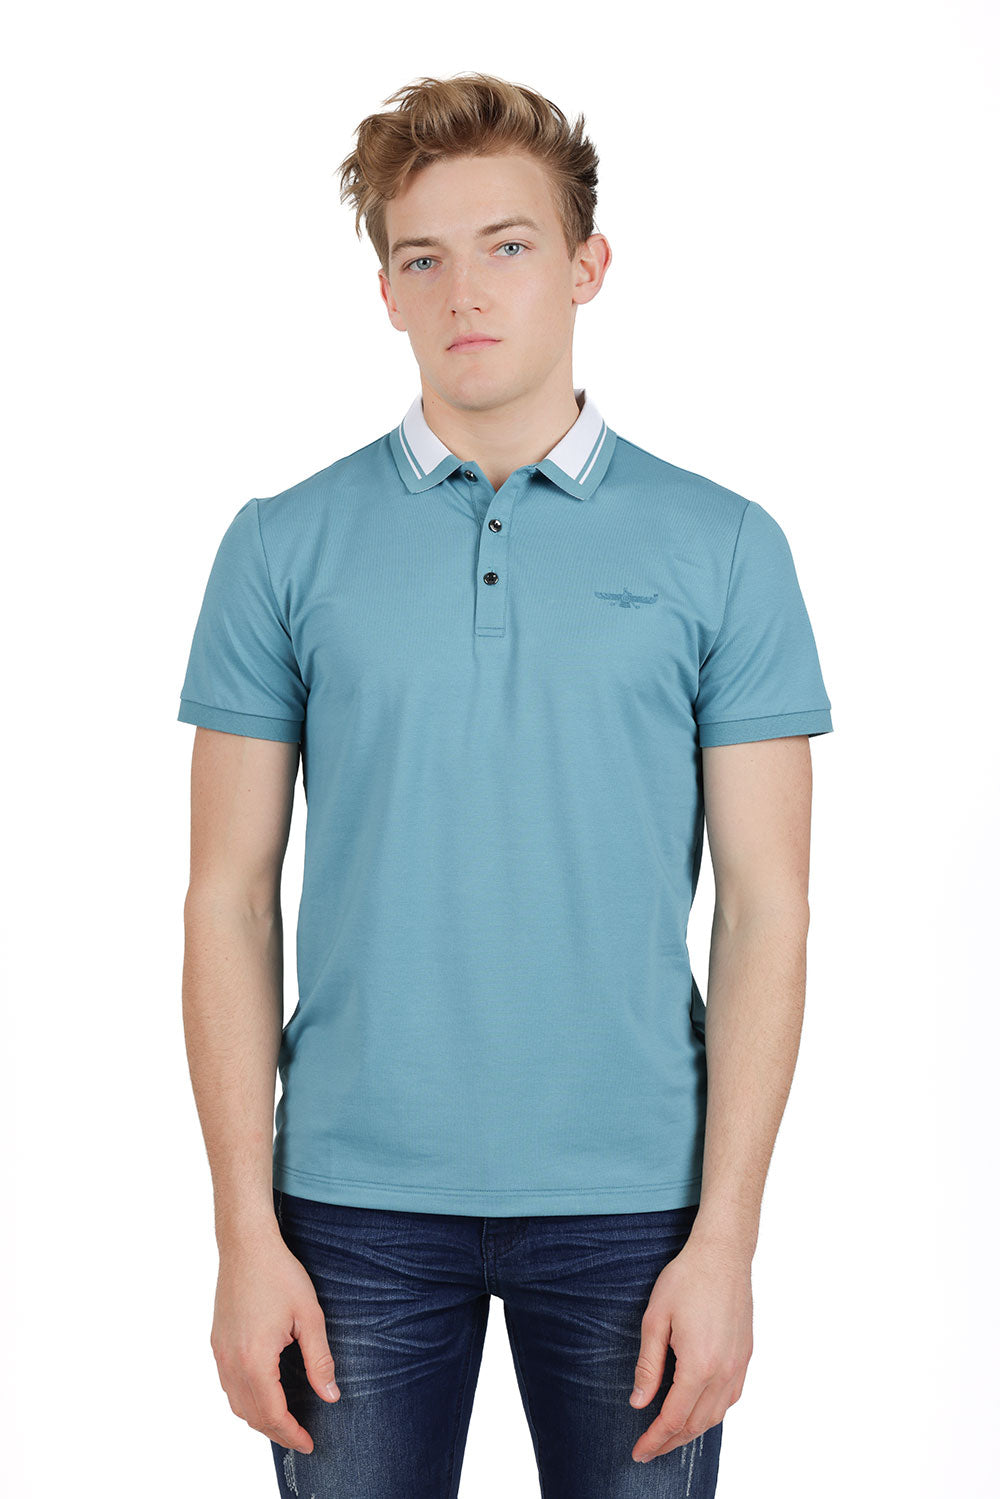 Barabas Men's Solid Color Luxury Short Sleeves Polo Shirts PP824